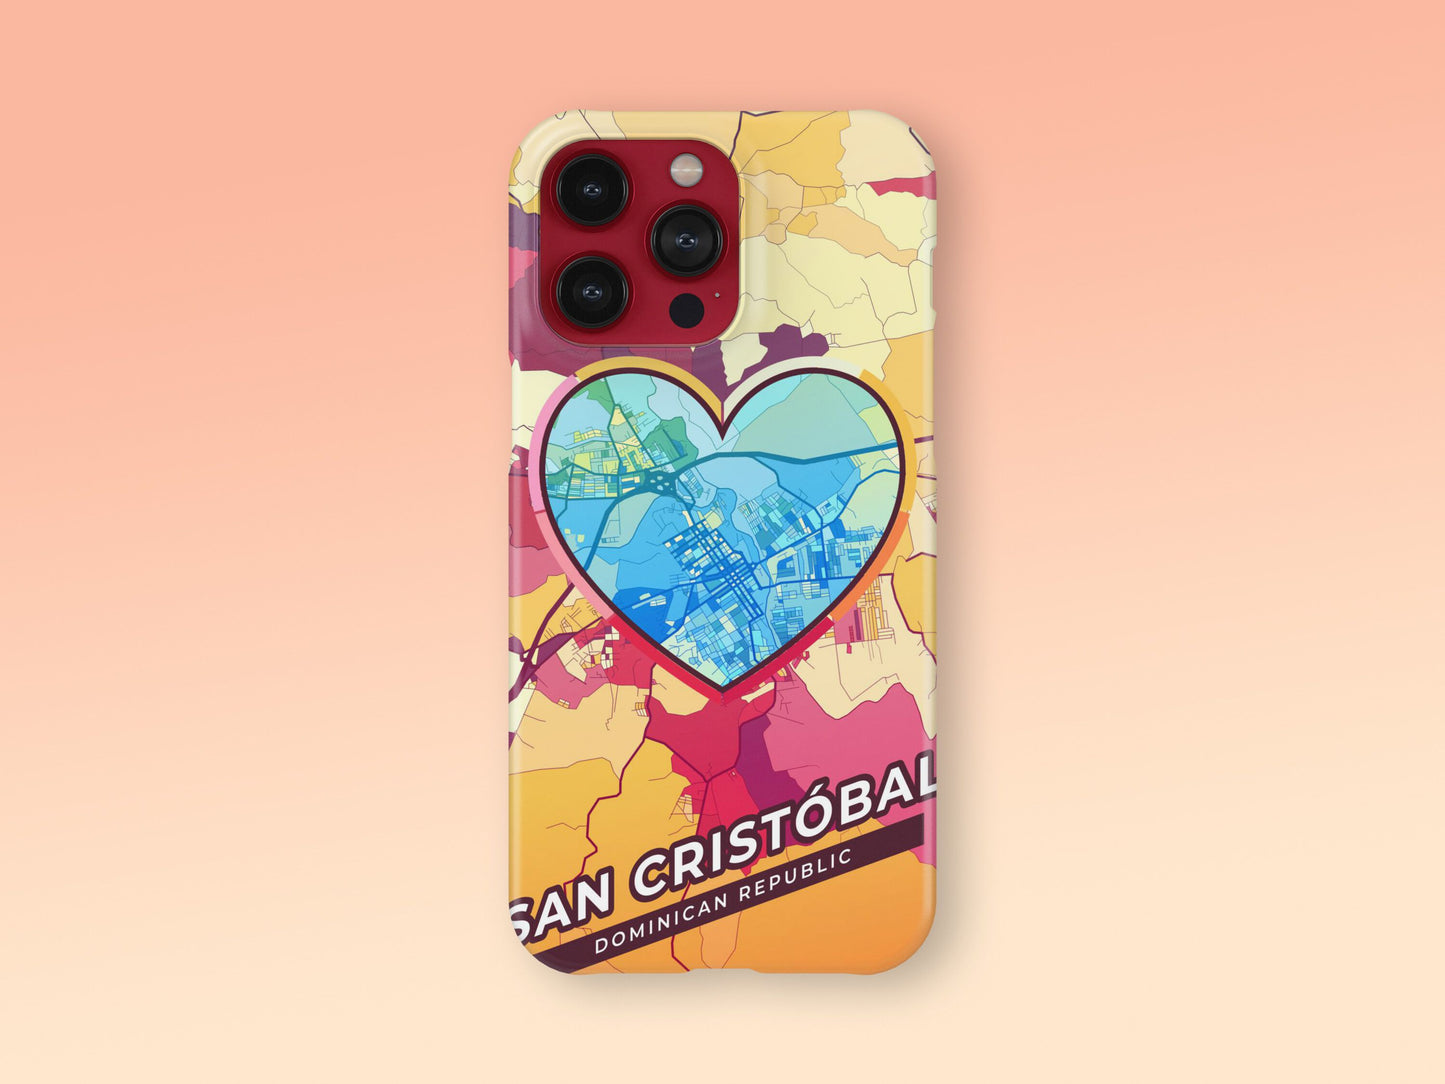 San Cristóbal Dominican Republic slim phone case with colorful icon. Birthday, wedding or housewarming gift. Couple match cases. 2